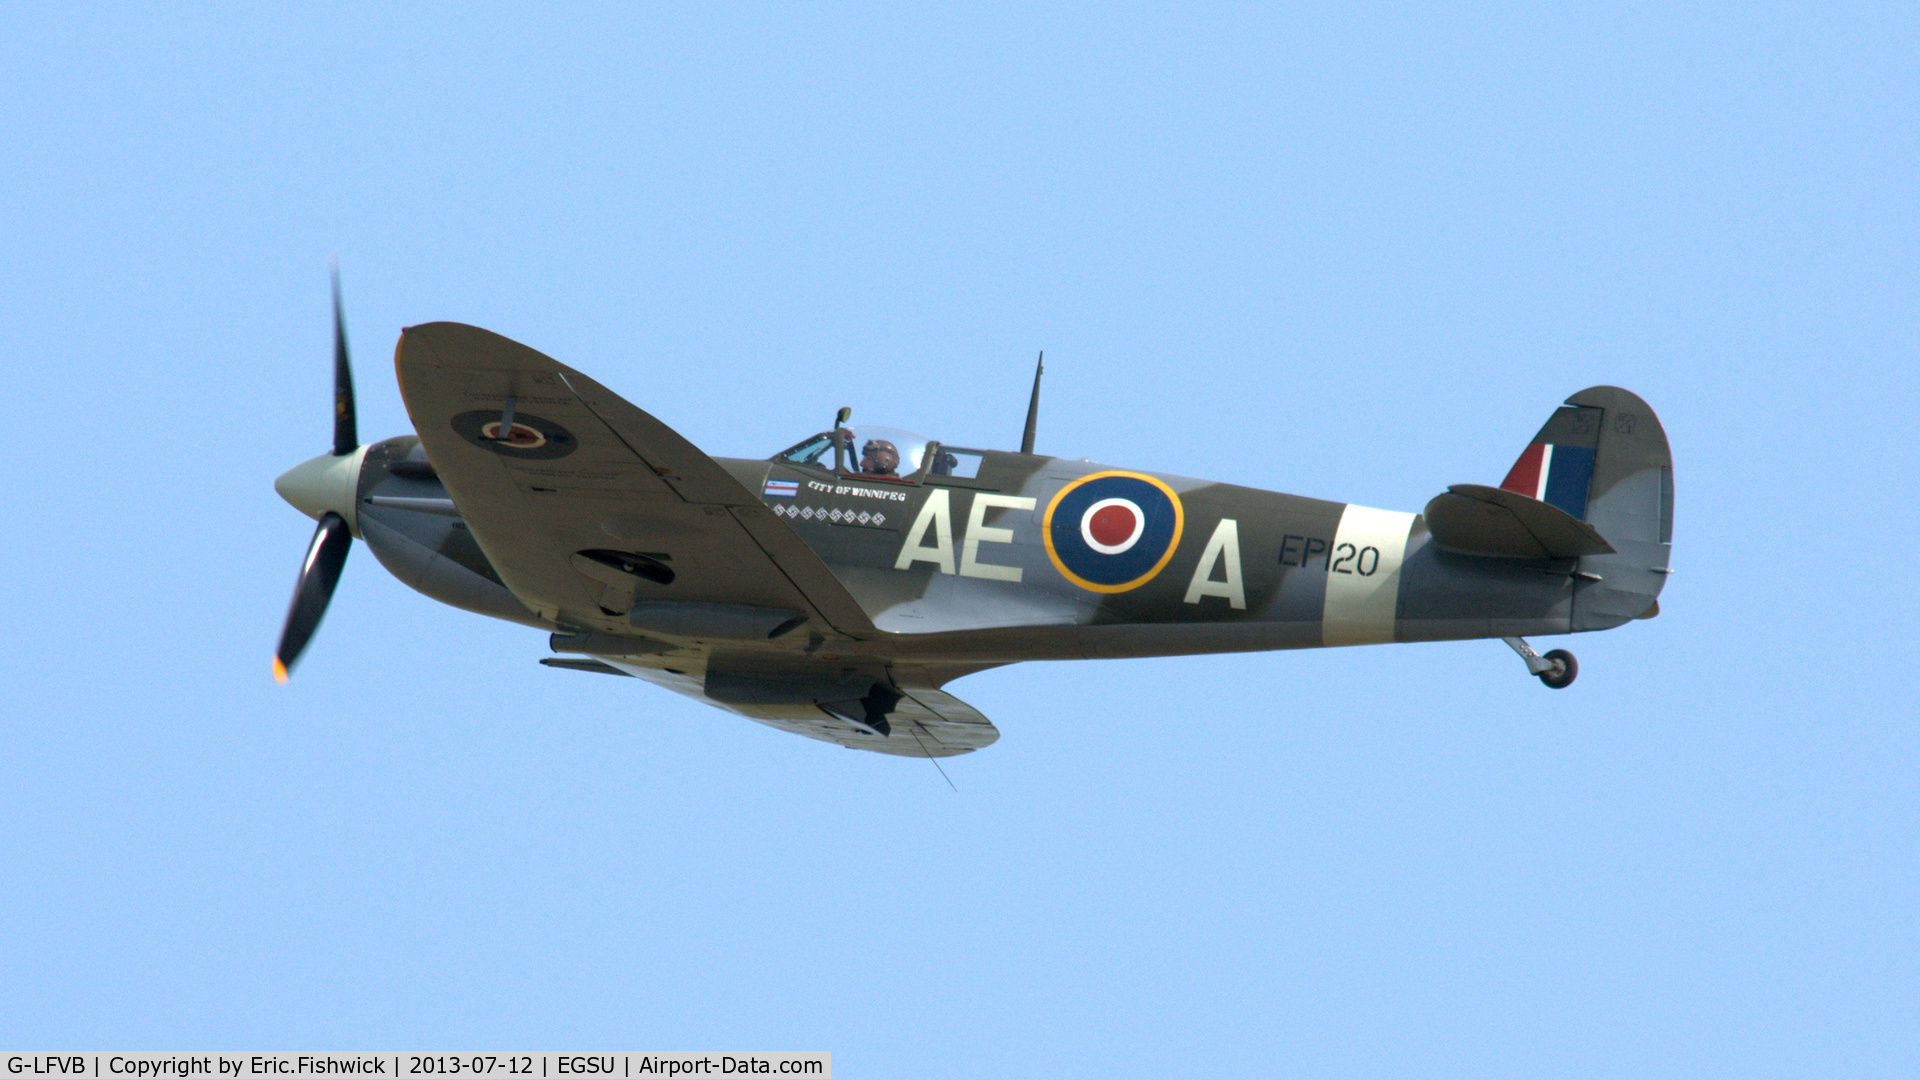 G-LFVB, 1942 Supermarine 349 Spitfire LF.Vb C/N CBAF.2403, 44. EP120 on the eve of Flying Legends Air Show, Duxford - July 2013.